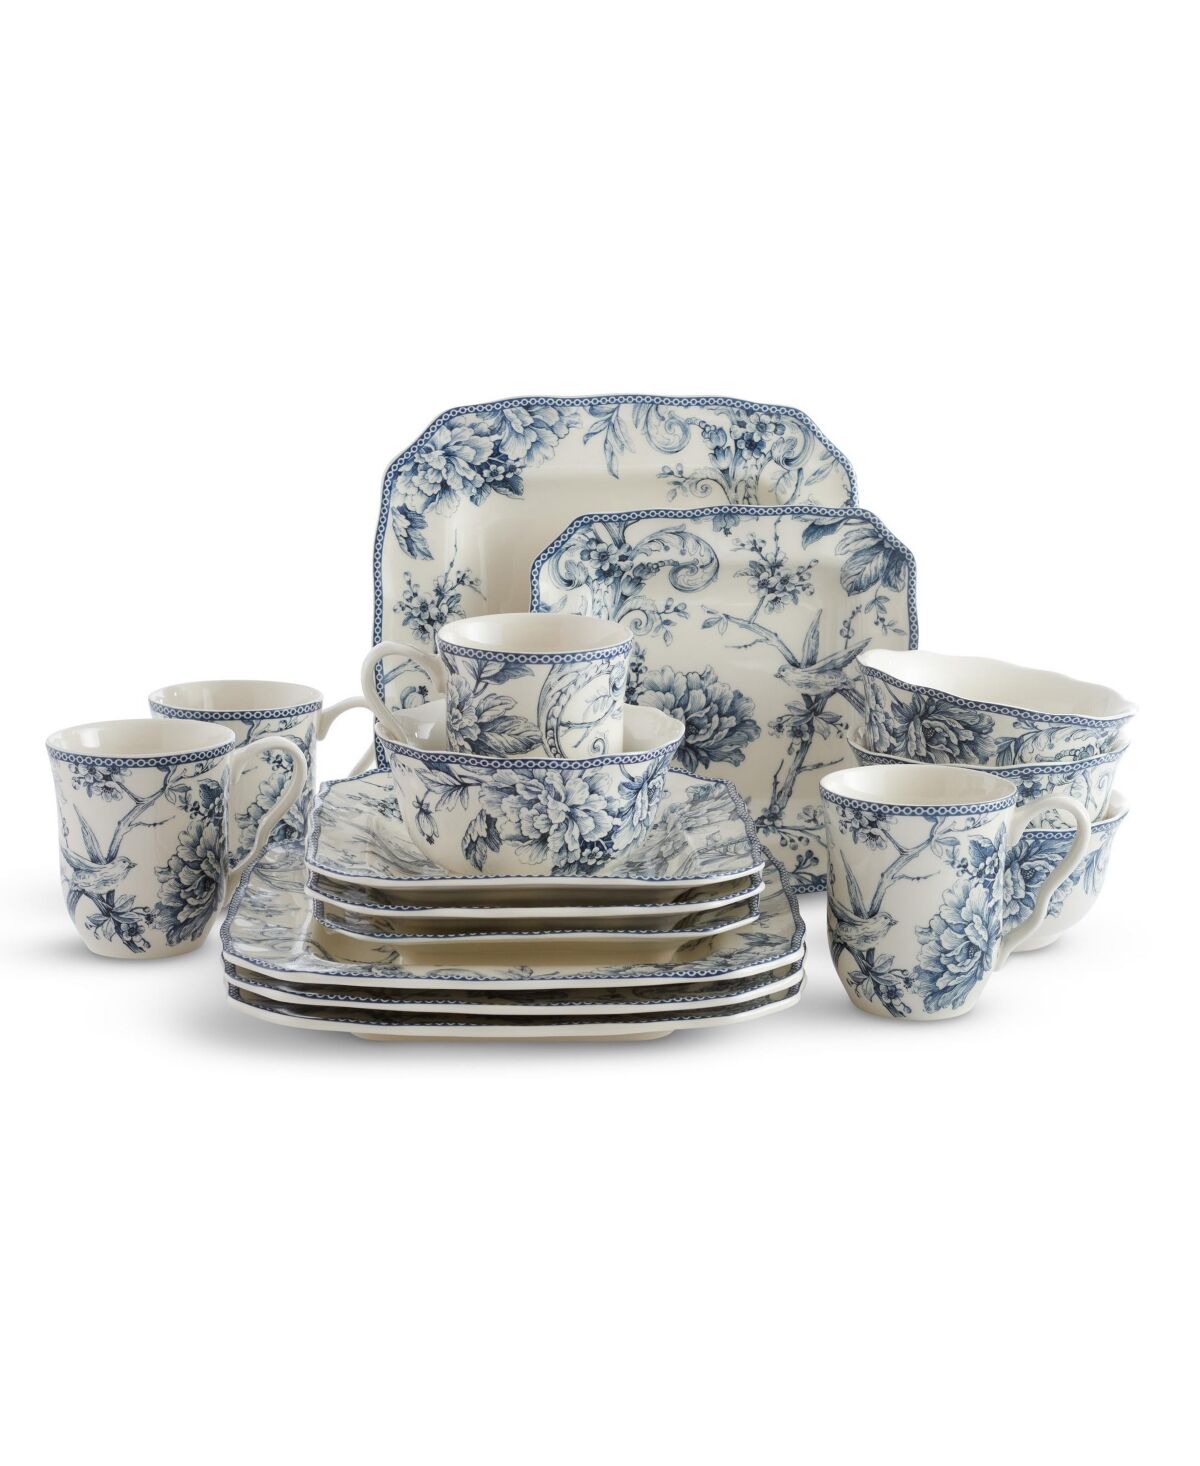 222 Fifth Adelaide Woodland 16-Pc. Dinnerware Set, Service for 4 - Blue